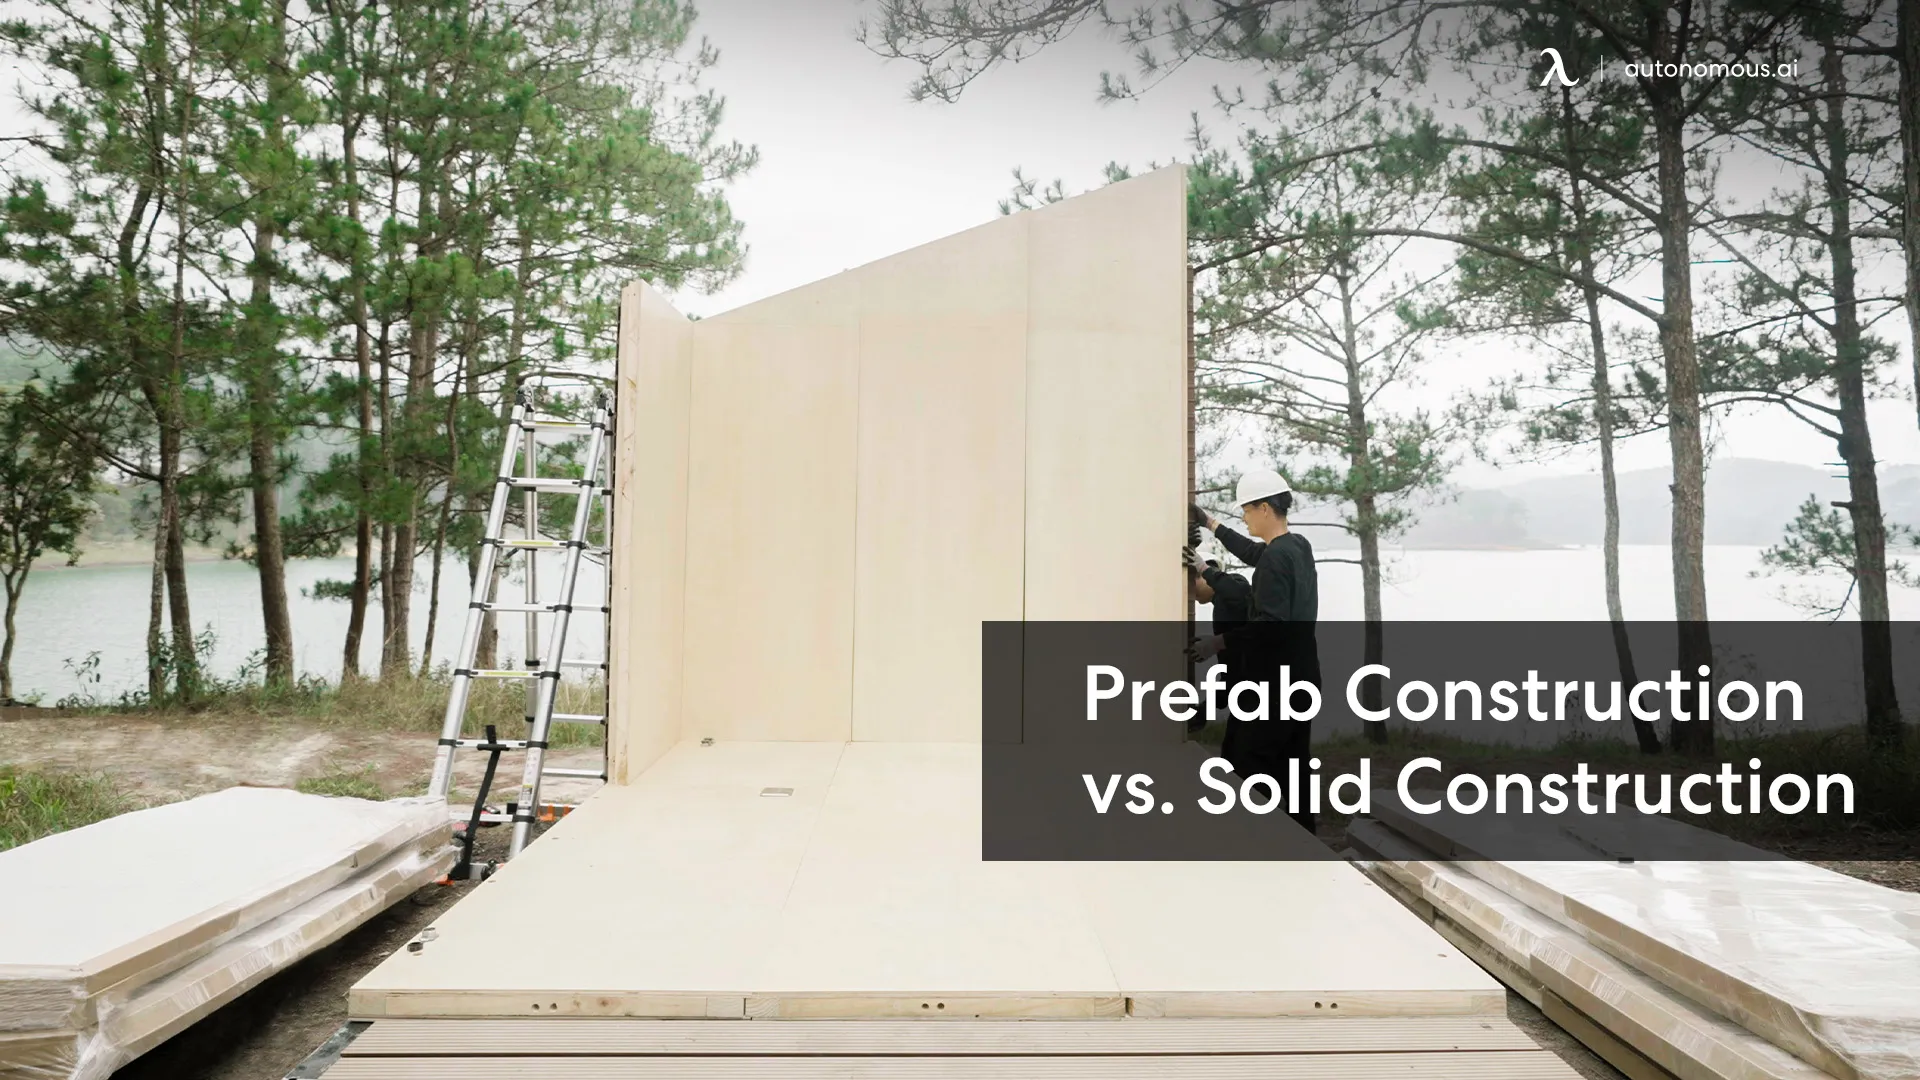 Prefab Construction vs. Solid Construction: How to Choose the Right One?